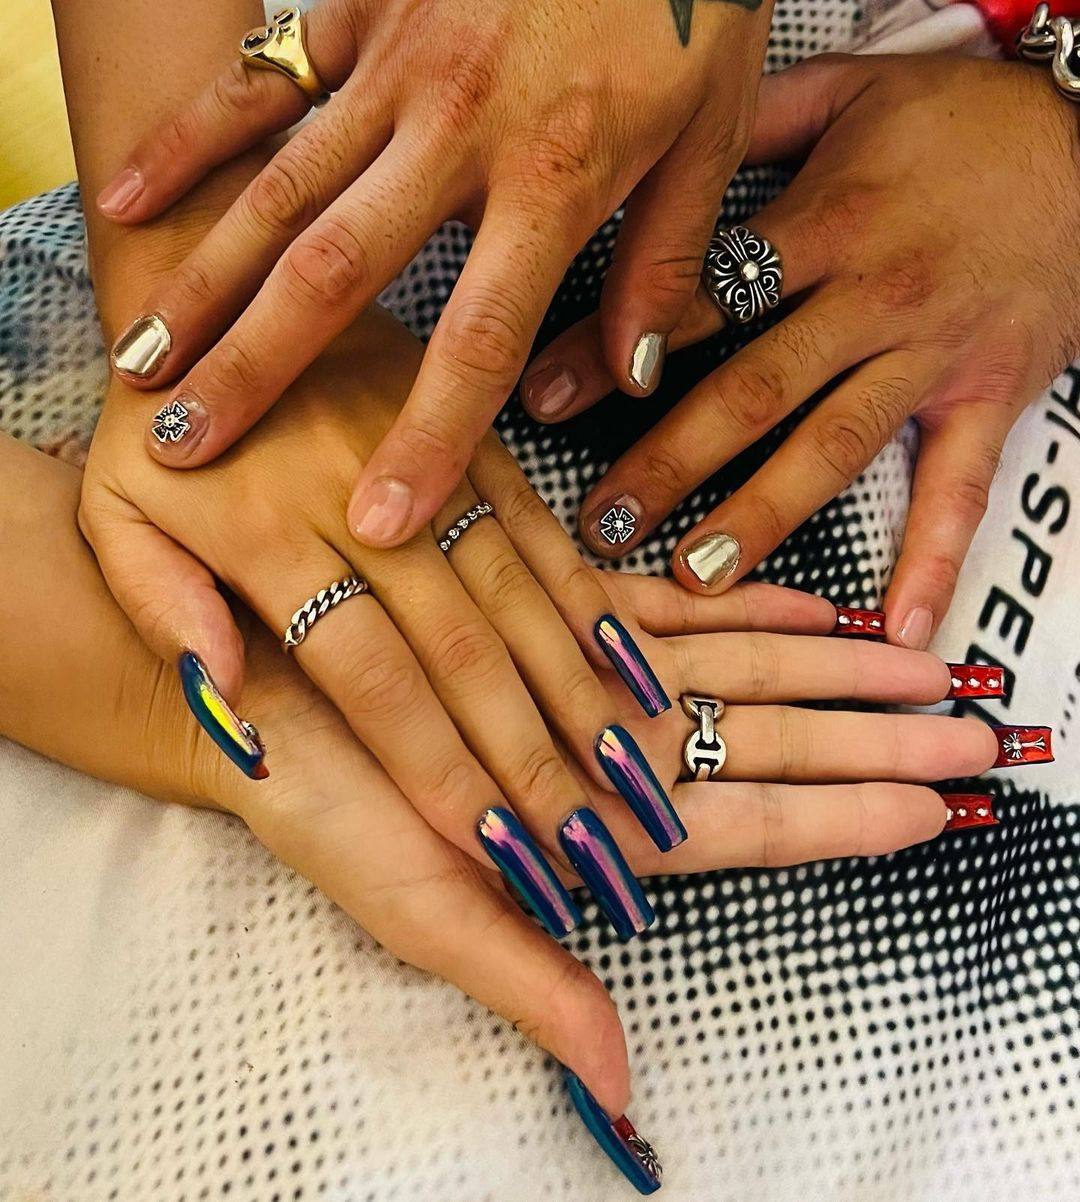 Nail trends change by the season, so what will this autumn hold? Photo: @britneytokyo/Instagram